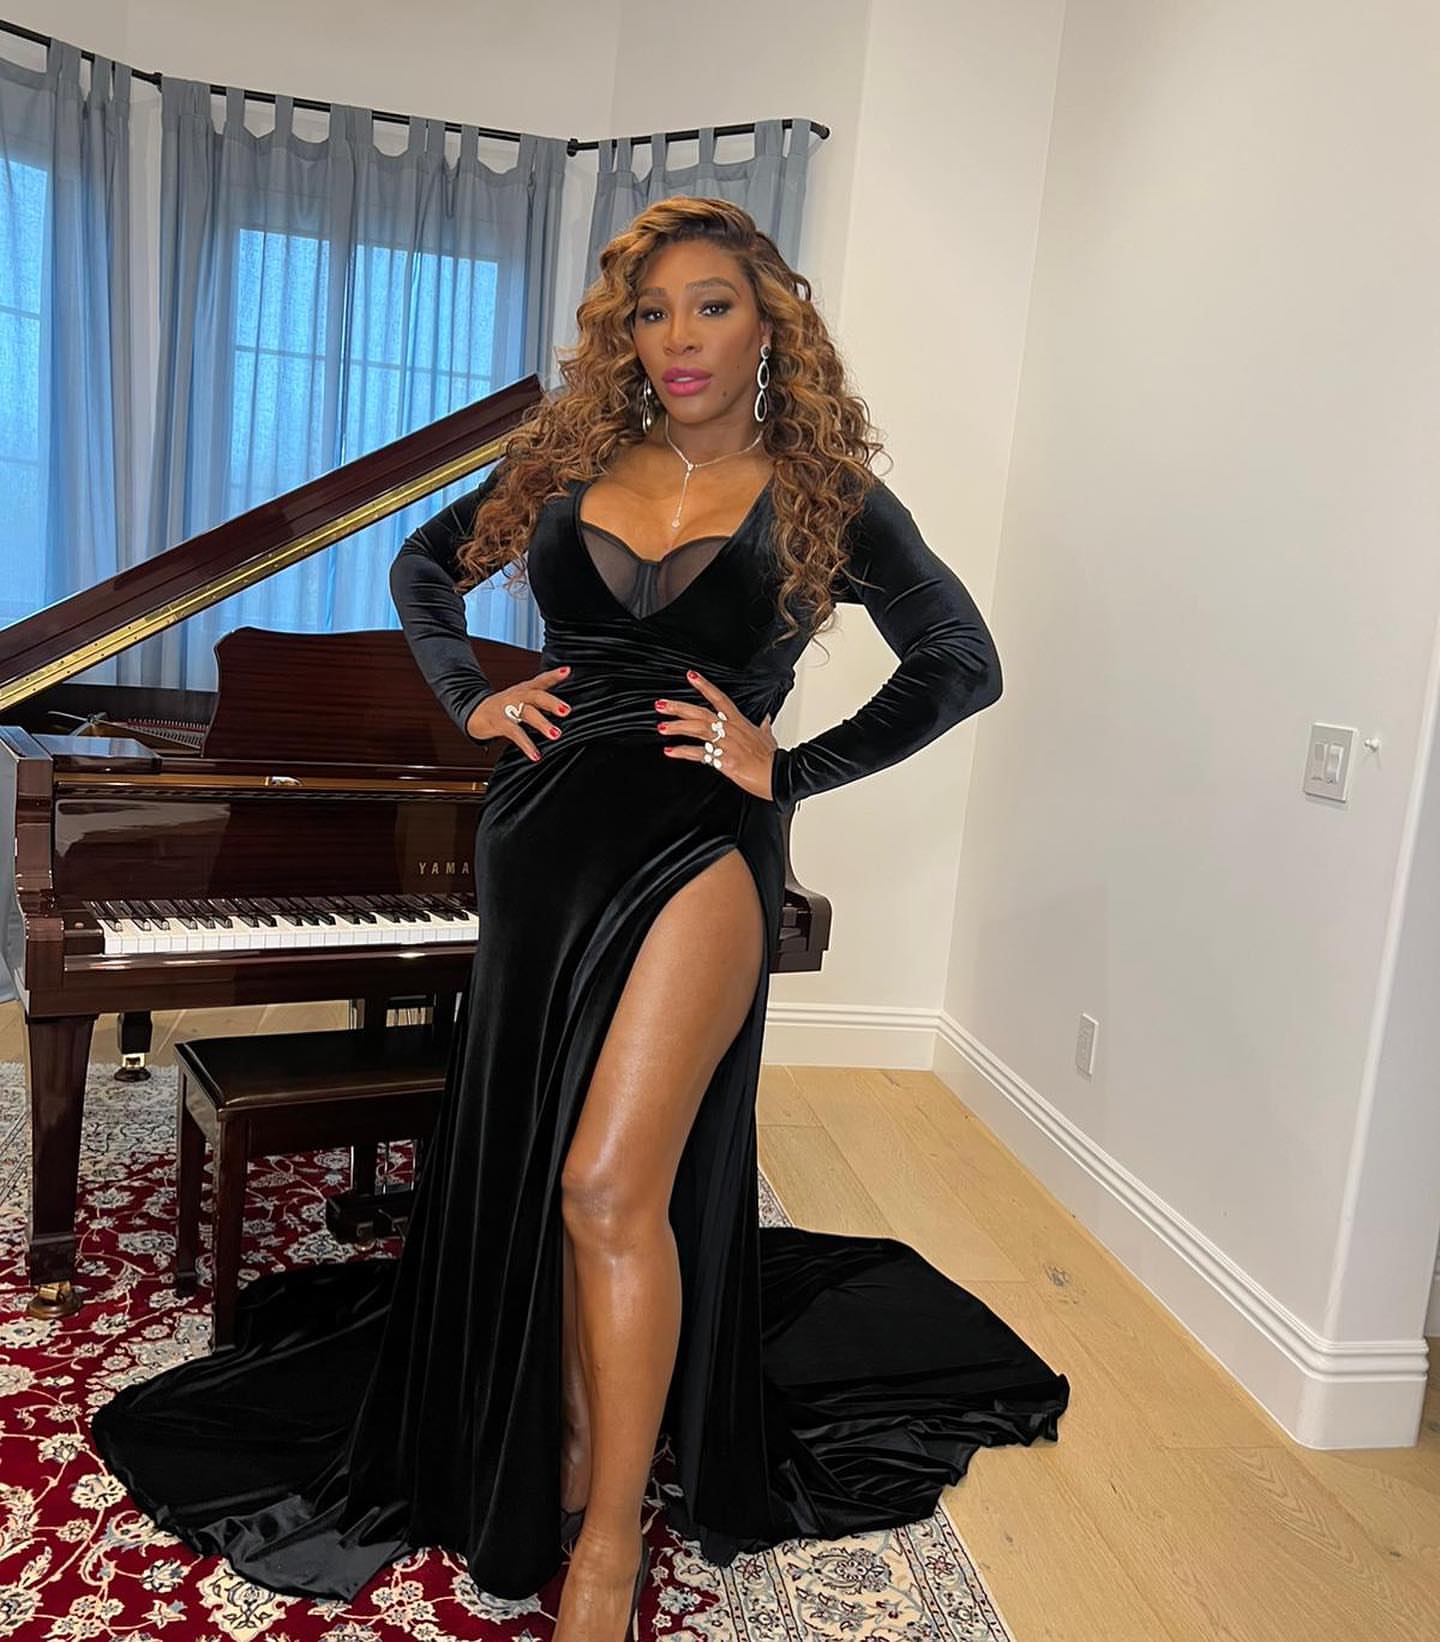 Serena Williams Shares Her Big Reveal! - Photo 15